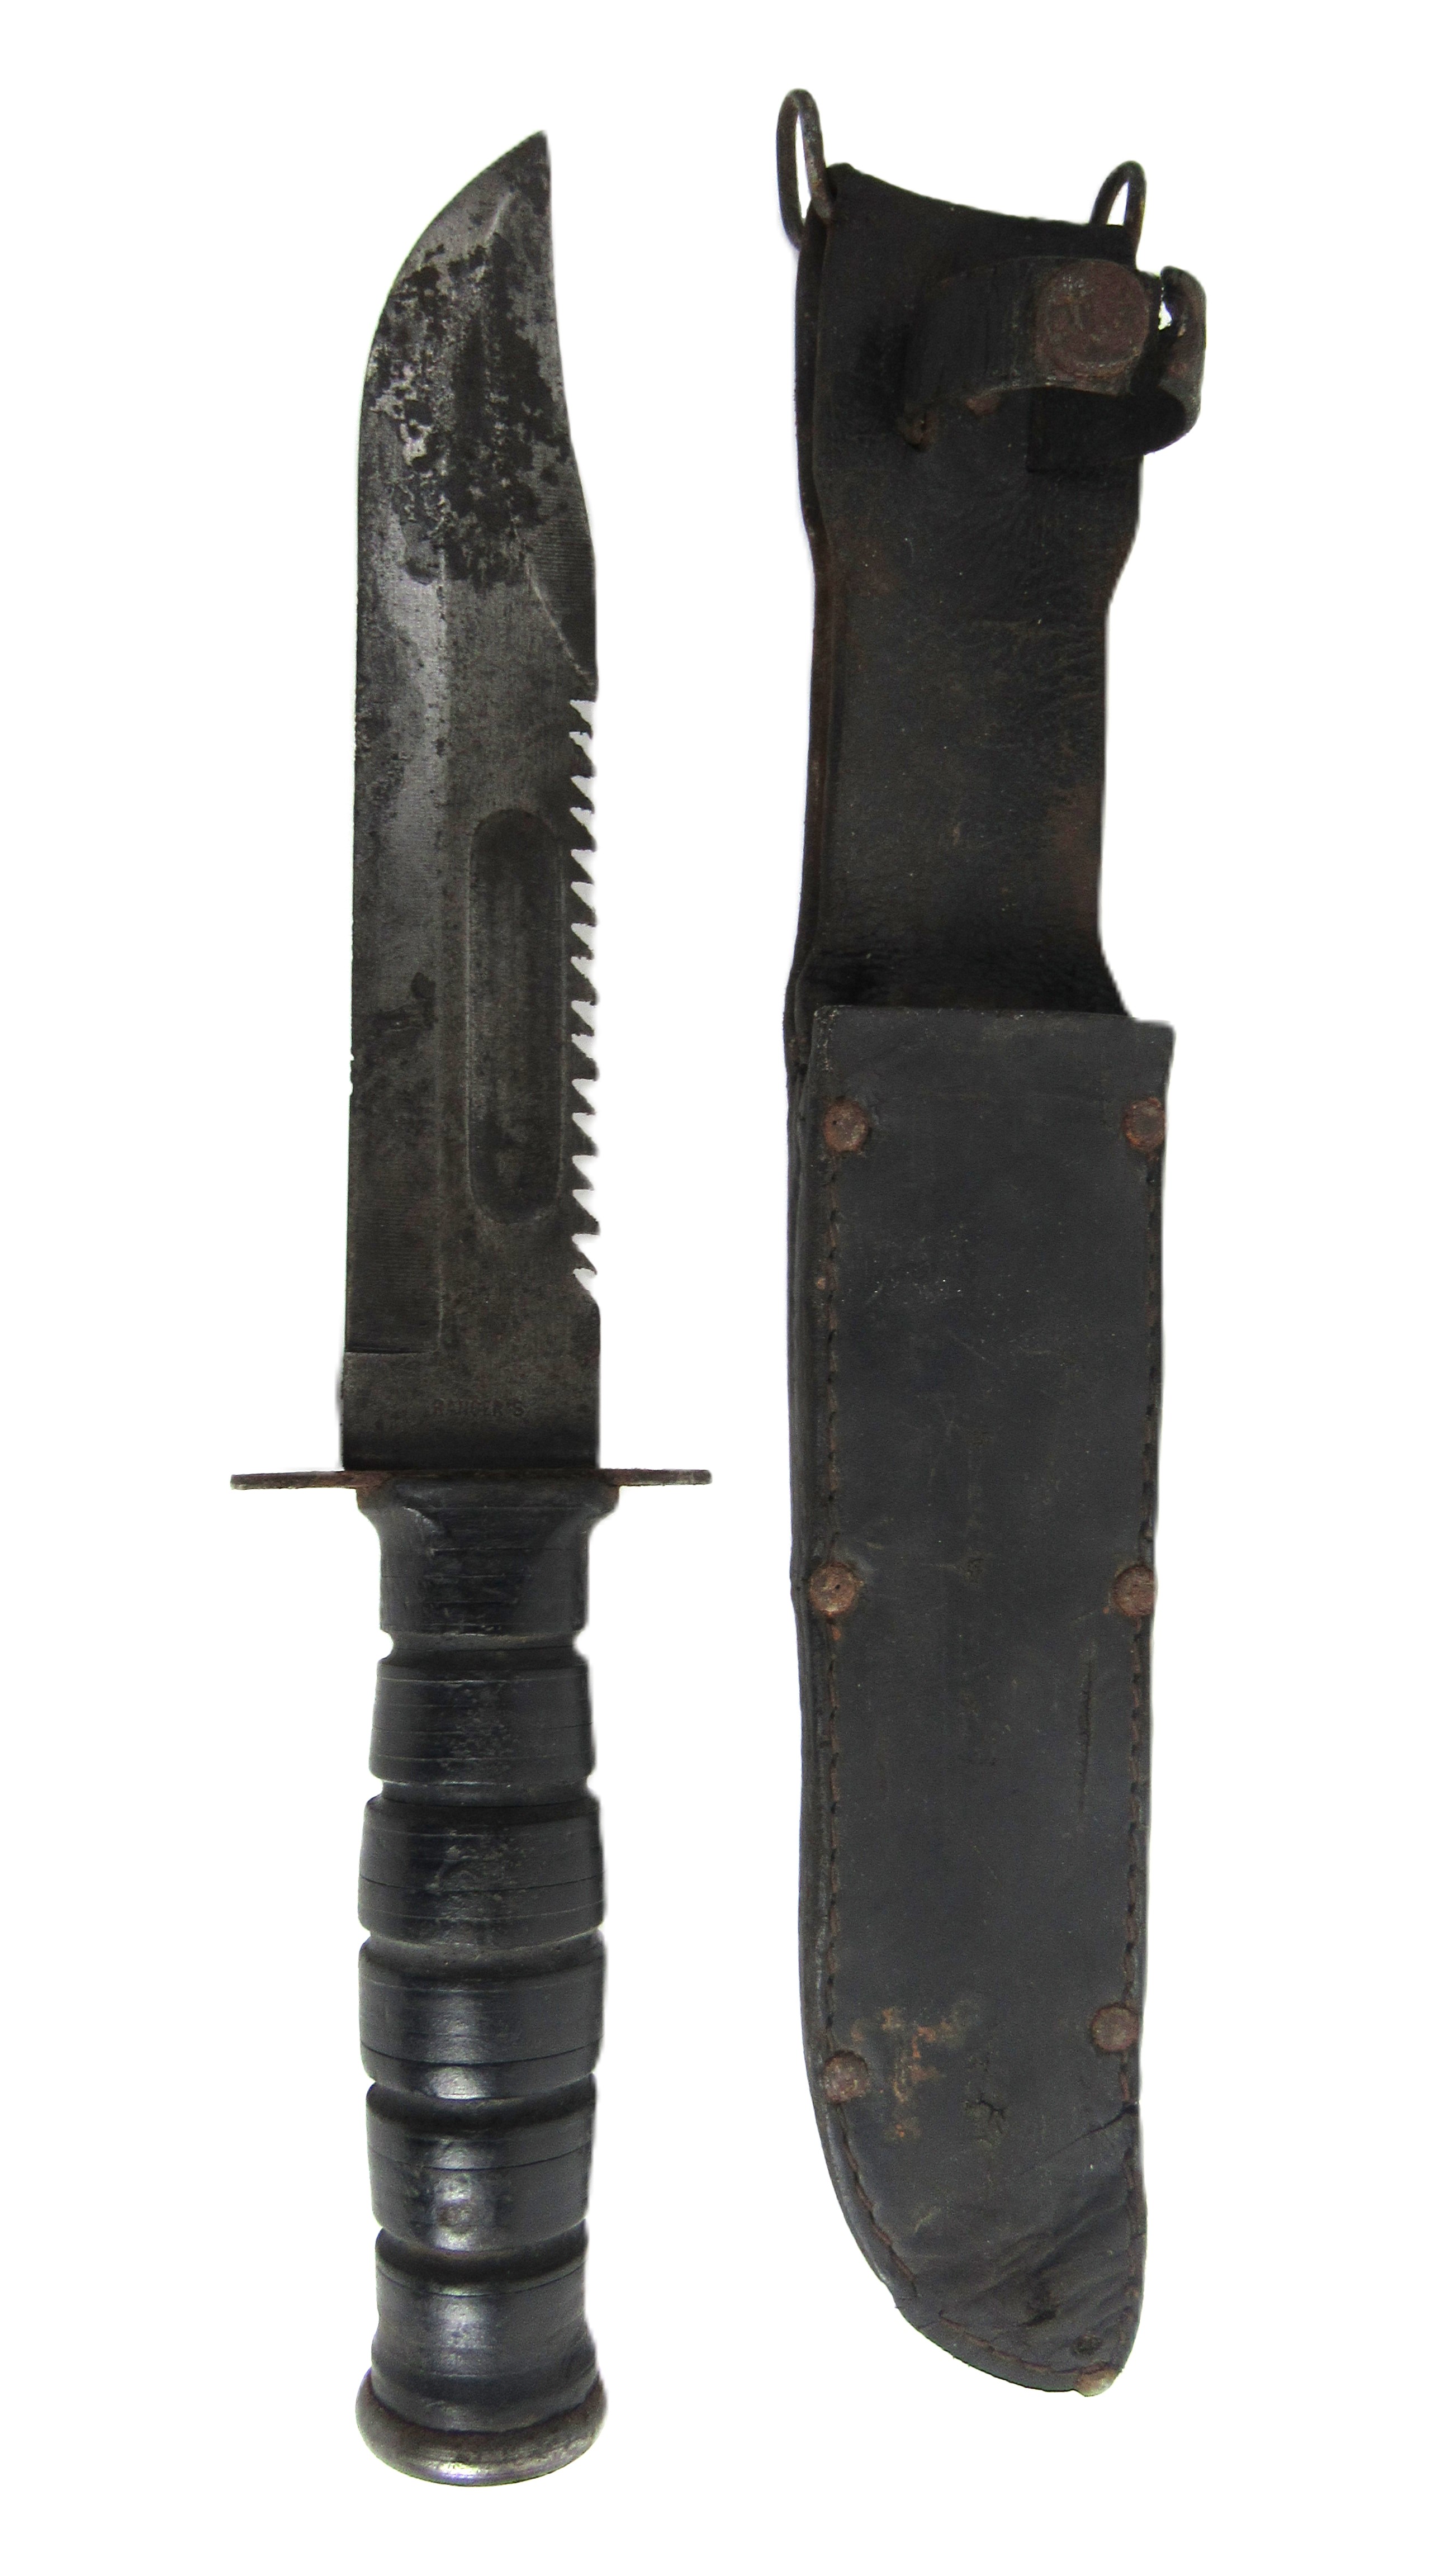 Militaria: A U.S. Army Issue Trench 'K' Bar Dagger, the blade stamped 'Rangers' in original